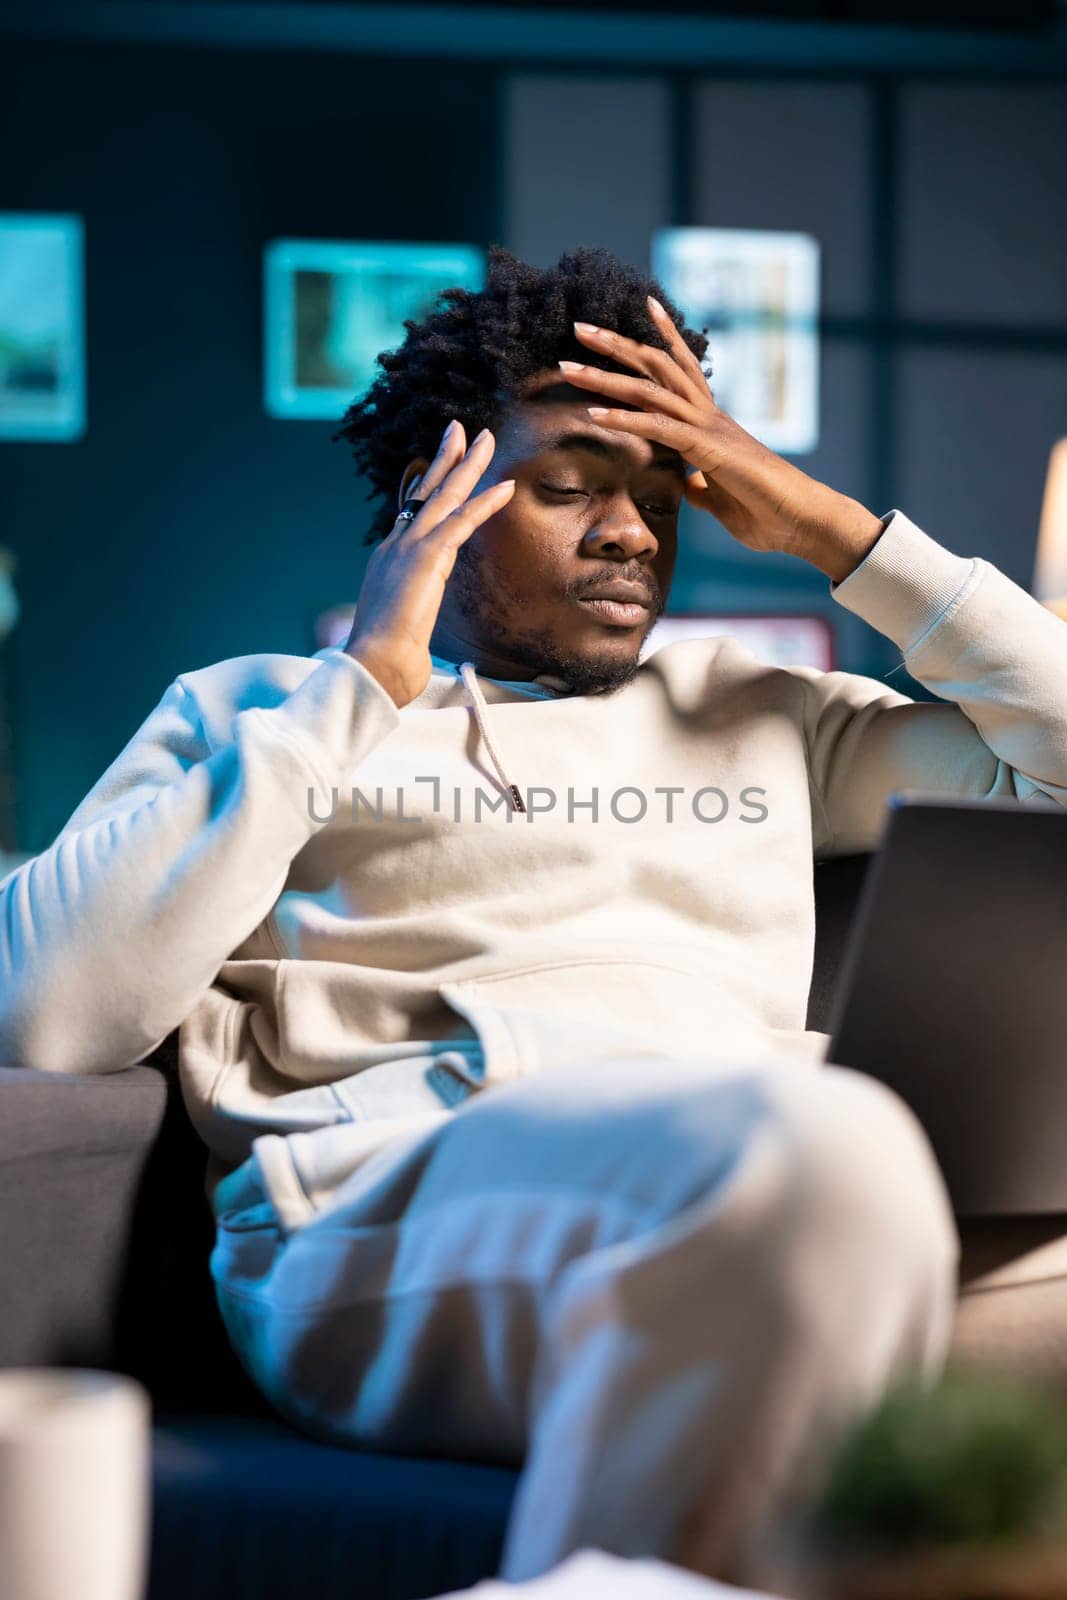 Anxious overworked man struggling to concentrate while working from home, hurting from severe headache. Tired teleworker exhausted after sleepless night, struggling to pay attention on tasks